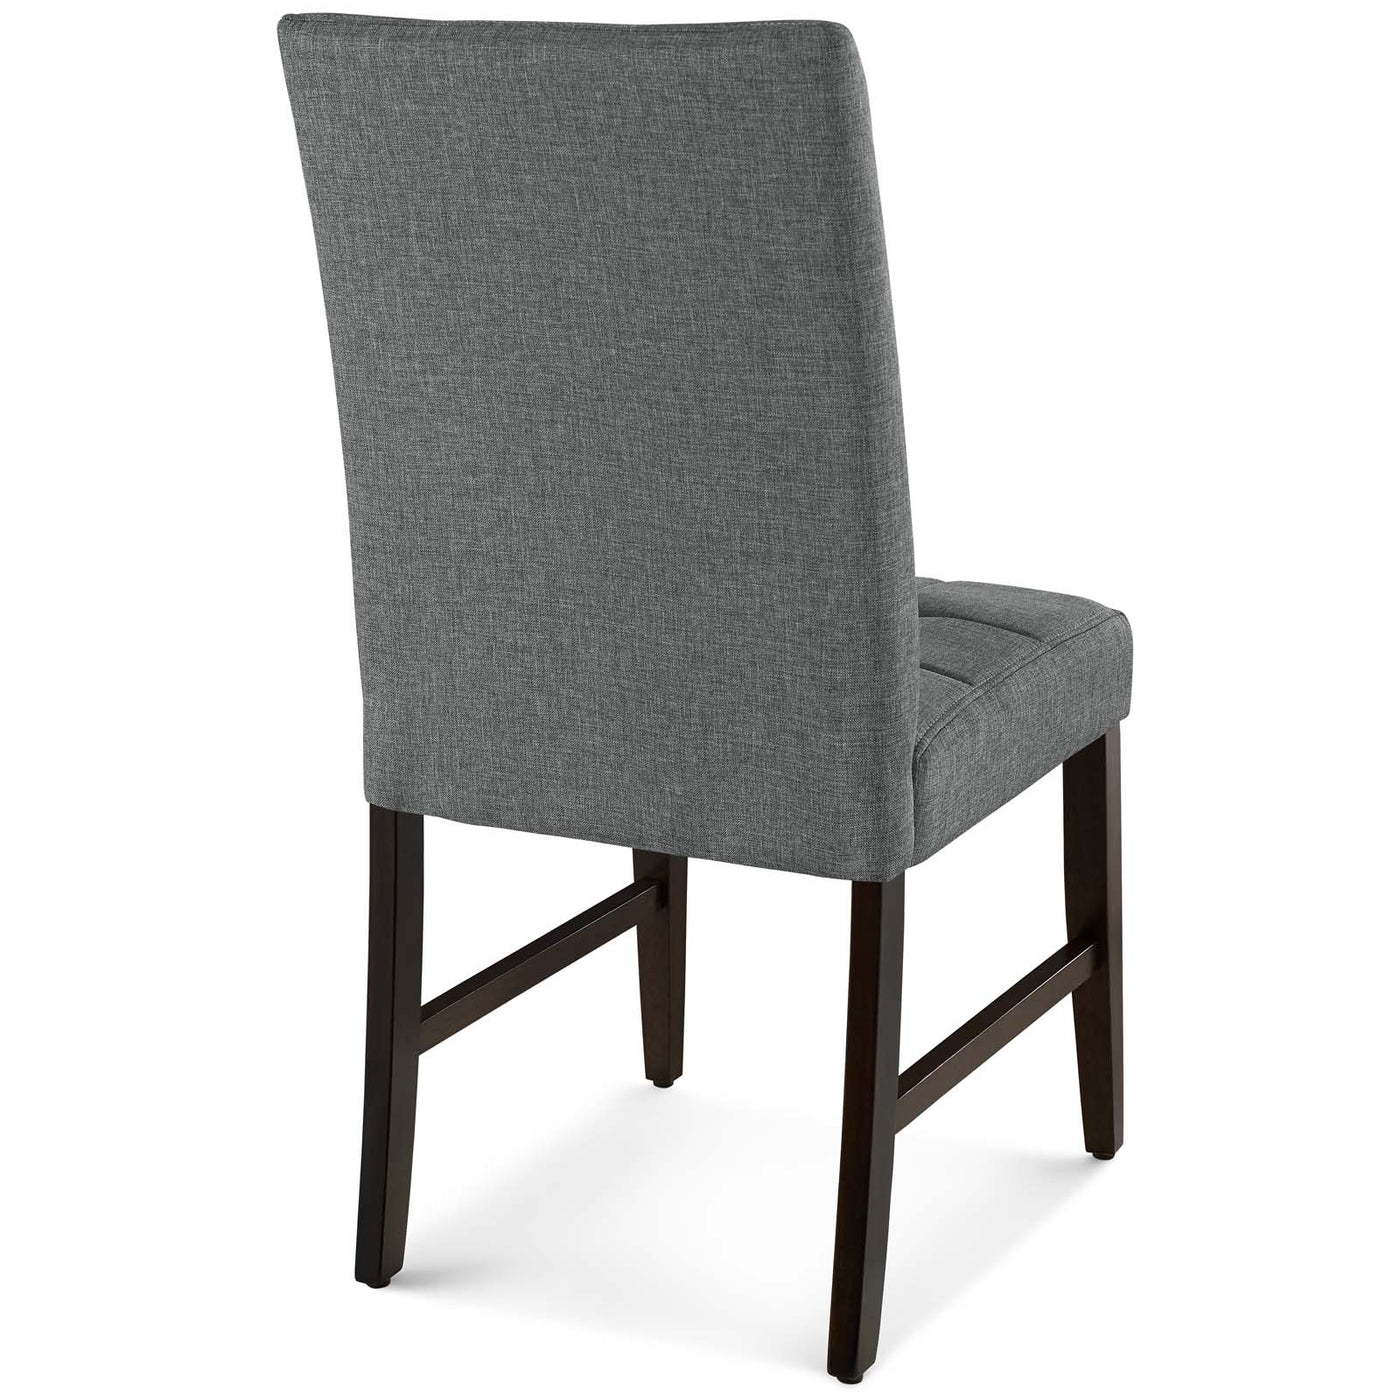 Promulgate Biscuit Tufted Upholstered Fabric Dining Chair Set of 2